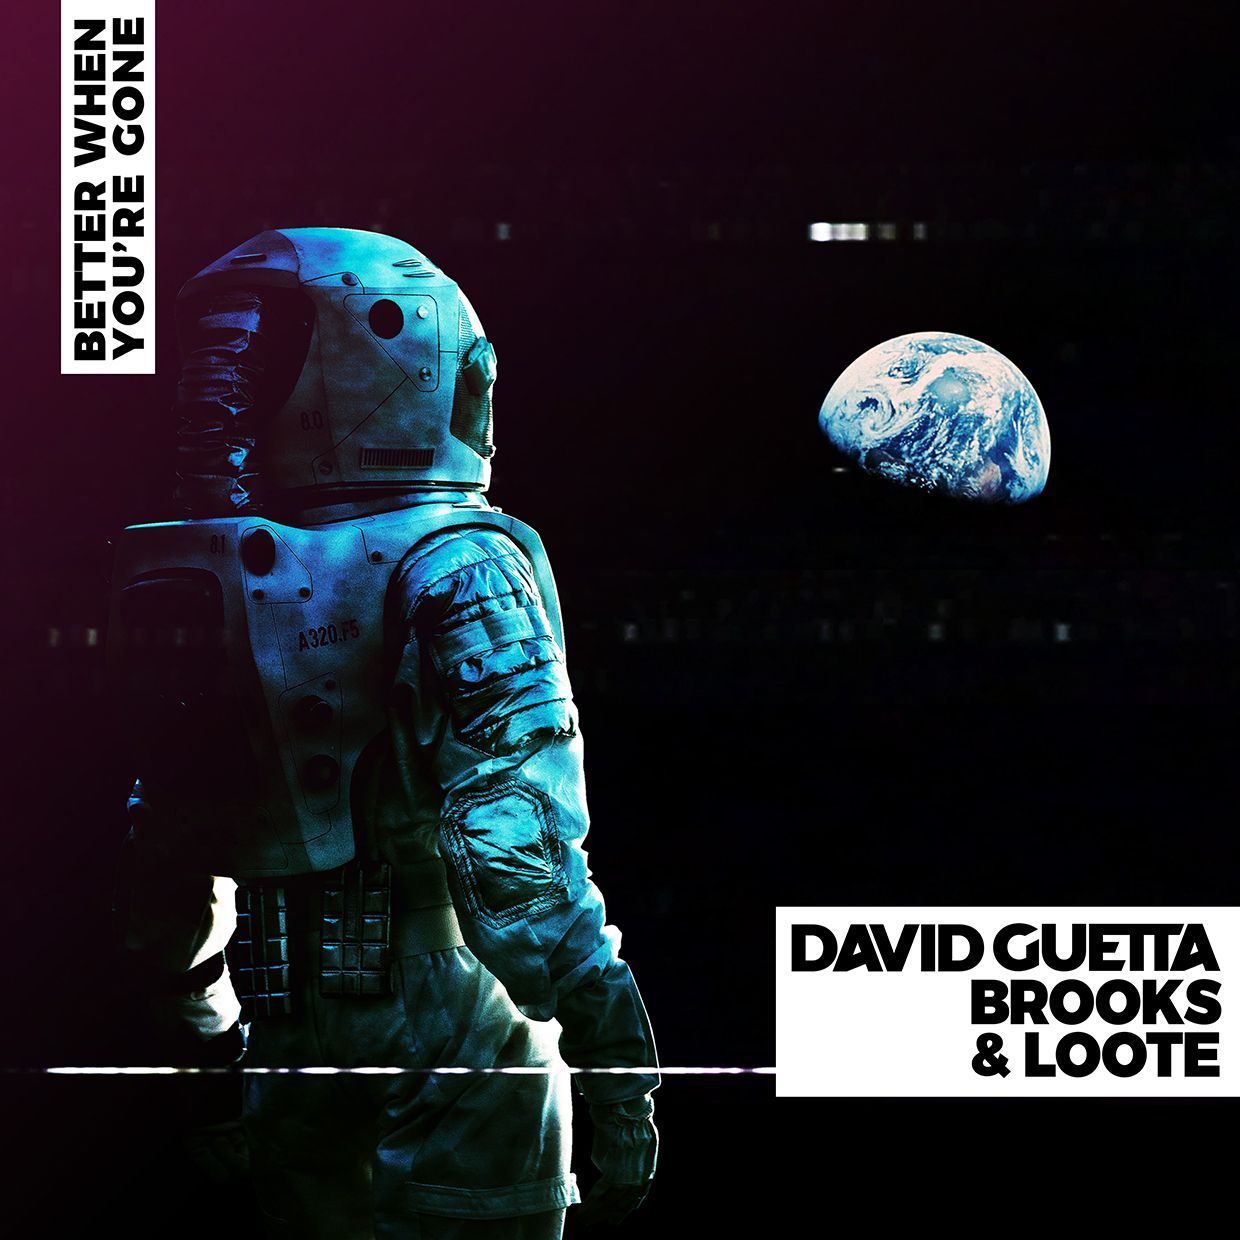 David Guetta, Brooks & Loote - Better When You're Gone [House]